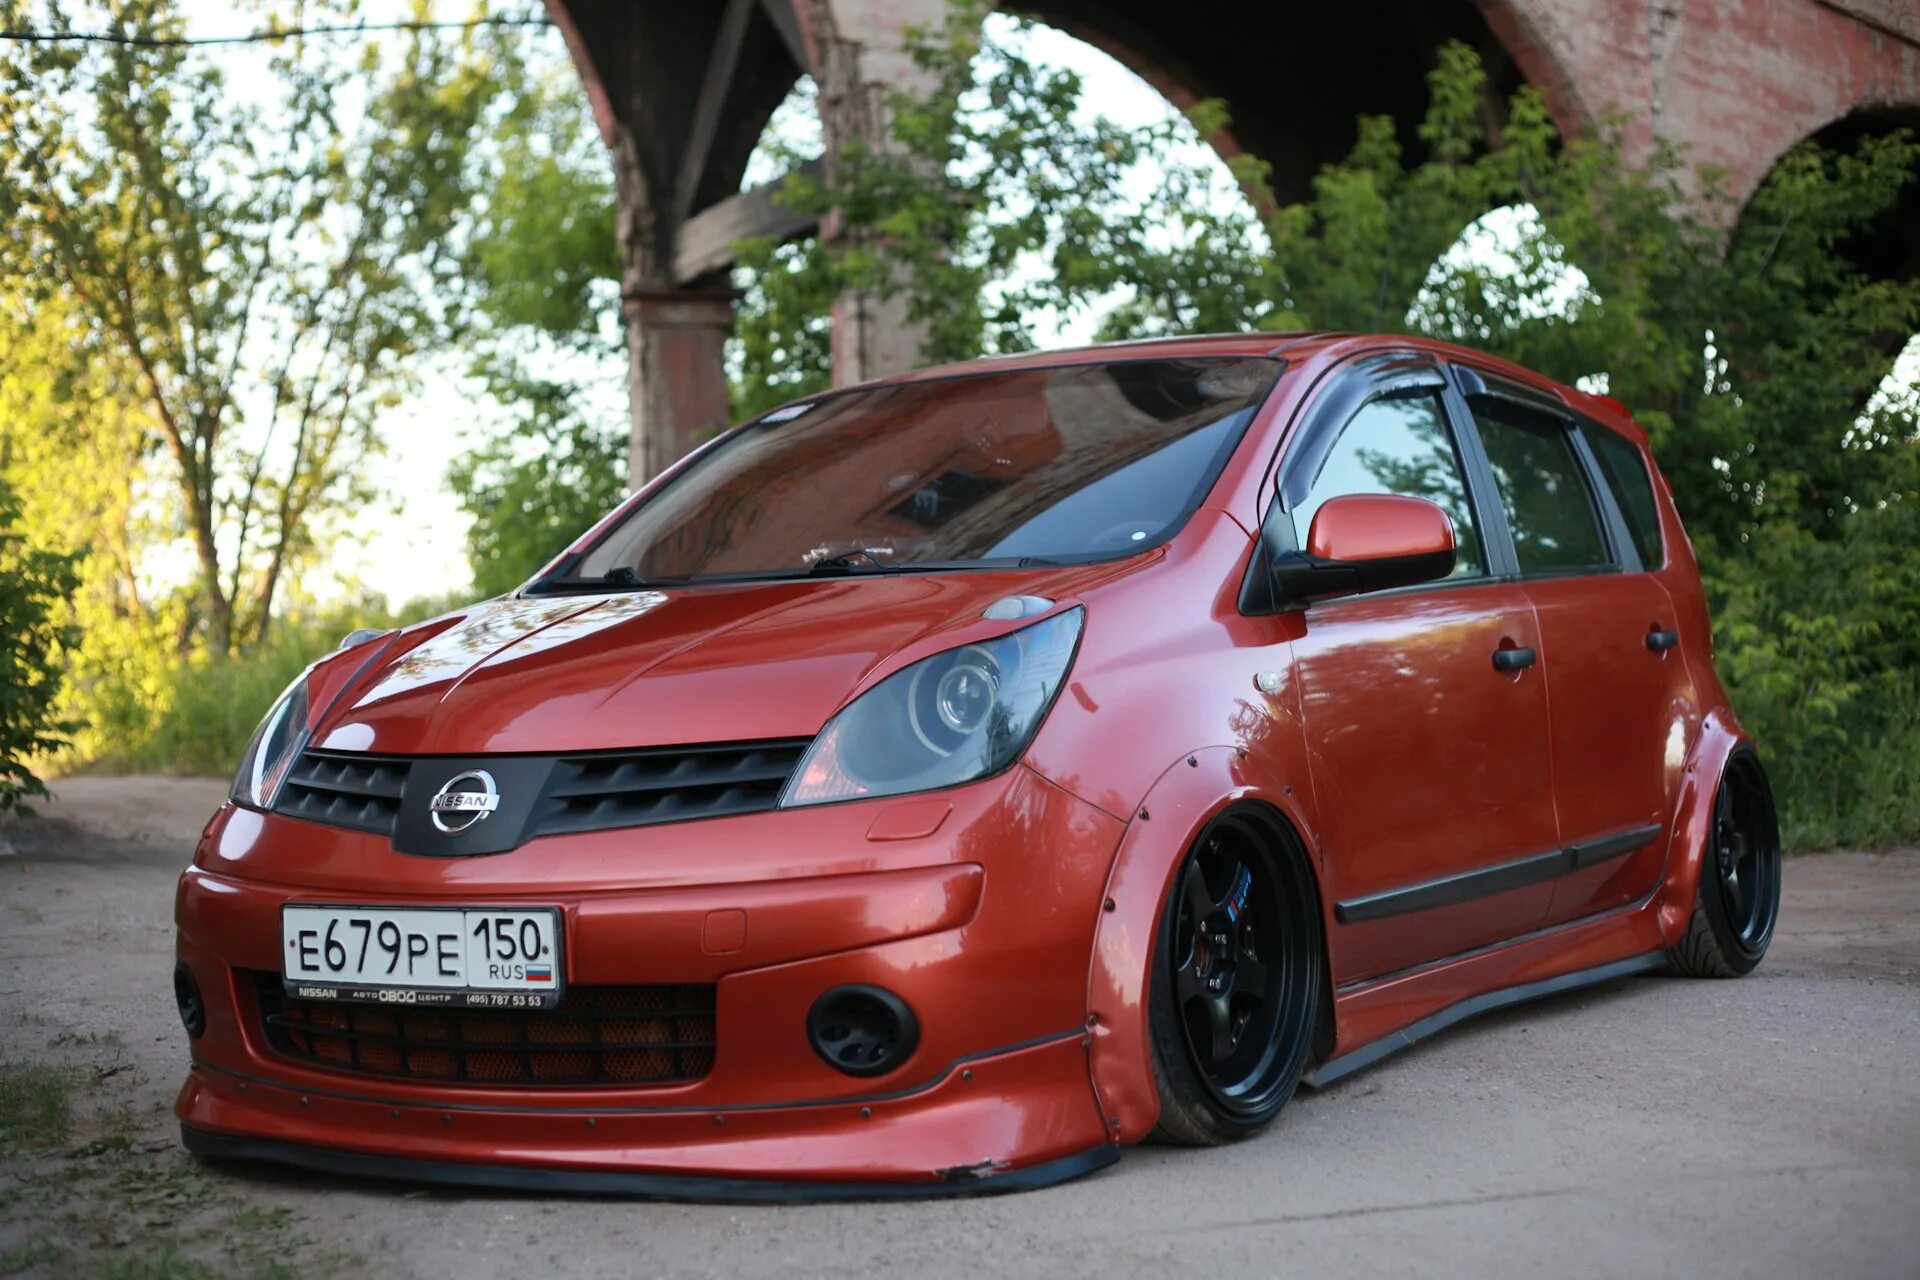 Nissan note 11. Nissan Note 2008 Tuning. Ниссан ноут е11. Nissan Note e11 stance. Обвес на Ниссан ноут е11.